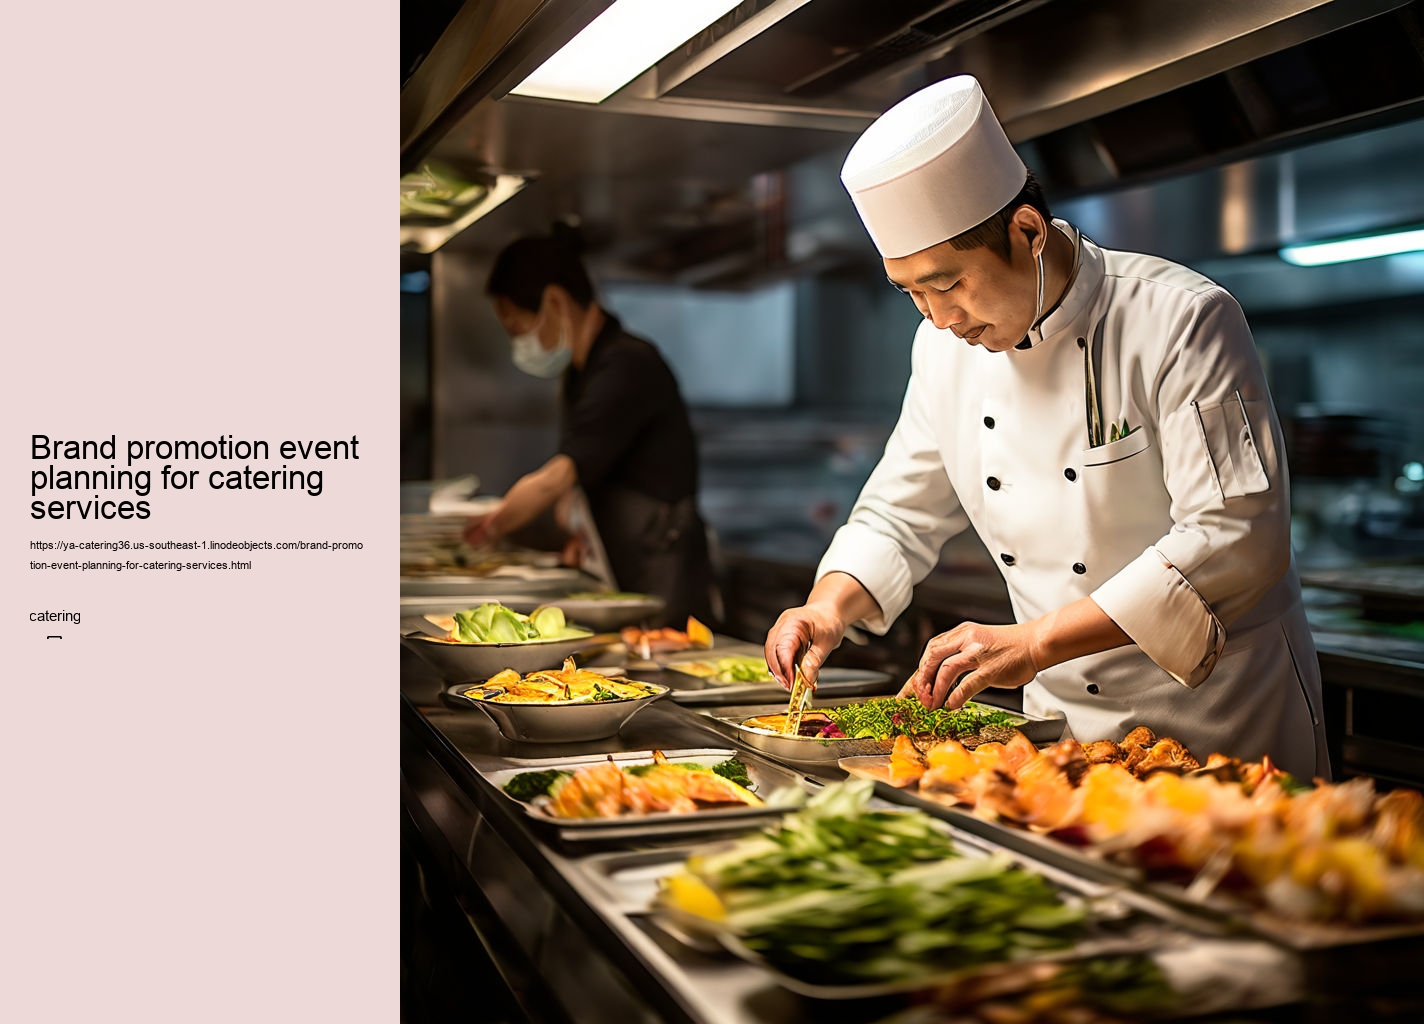 Brand promotion event planning for catering services